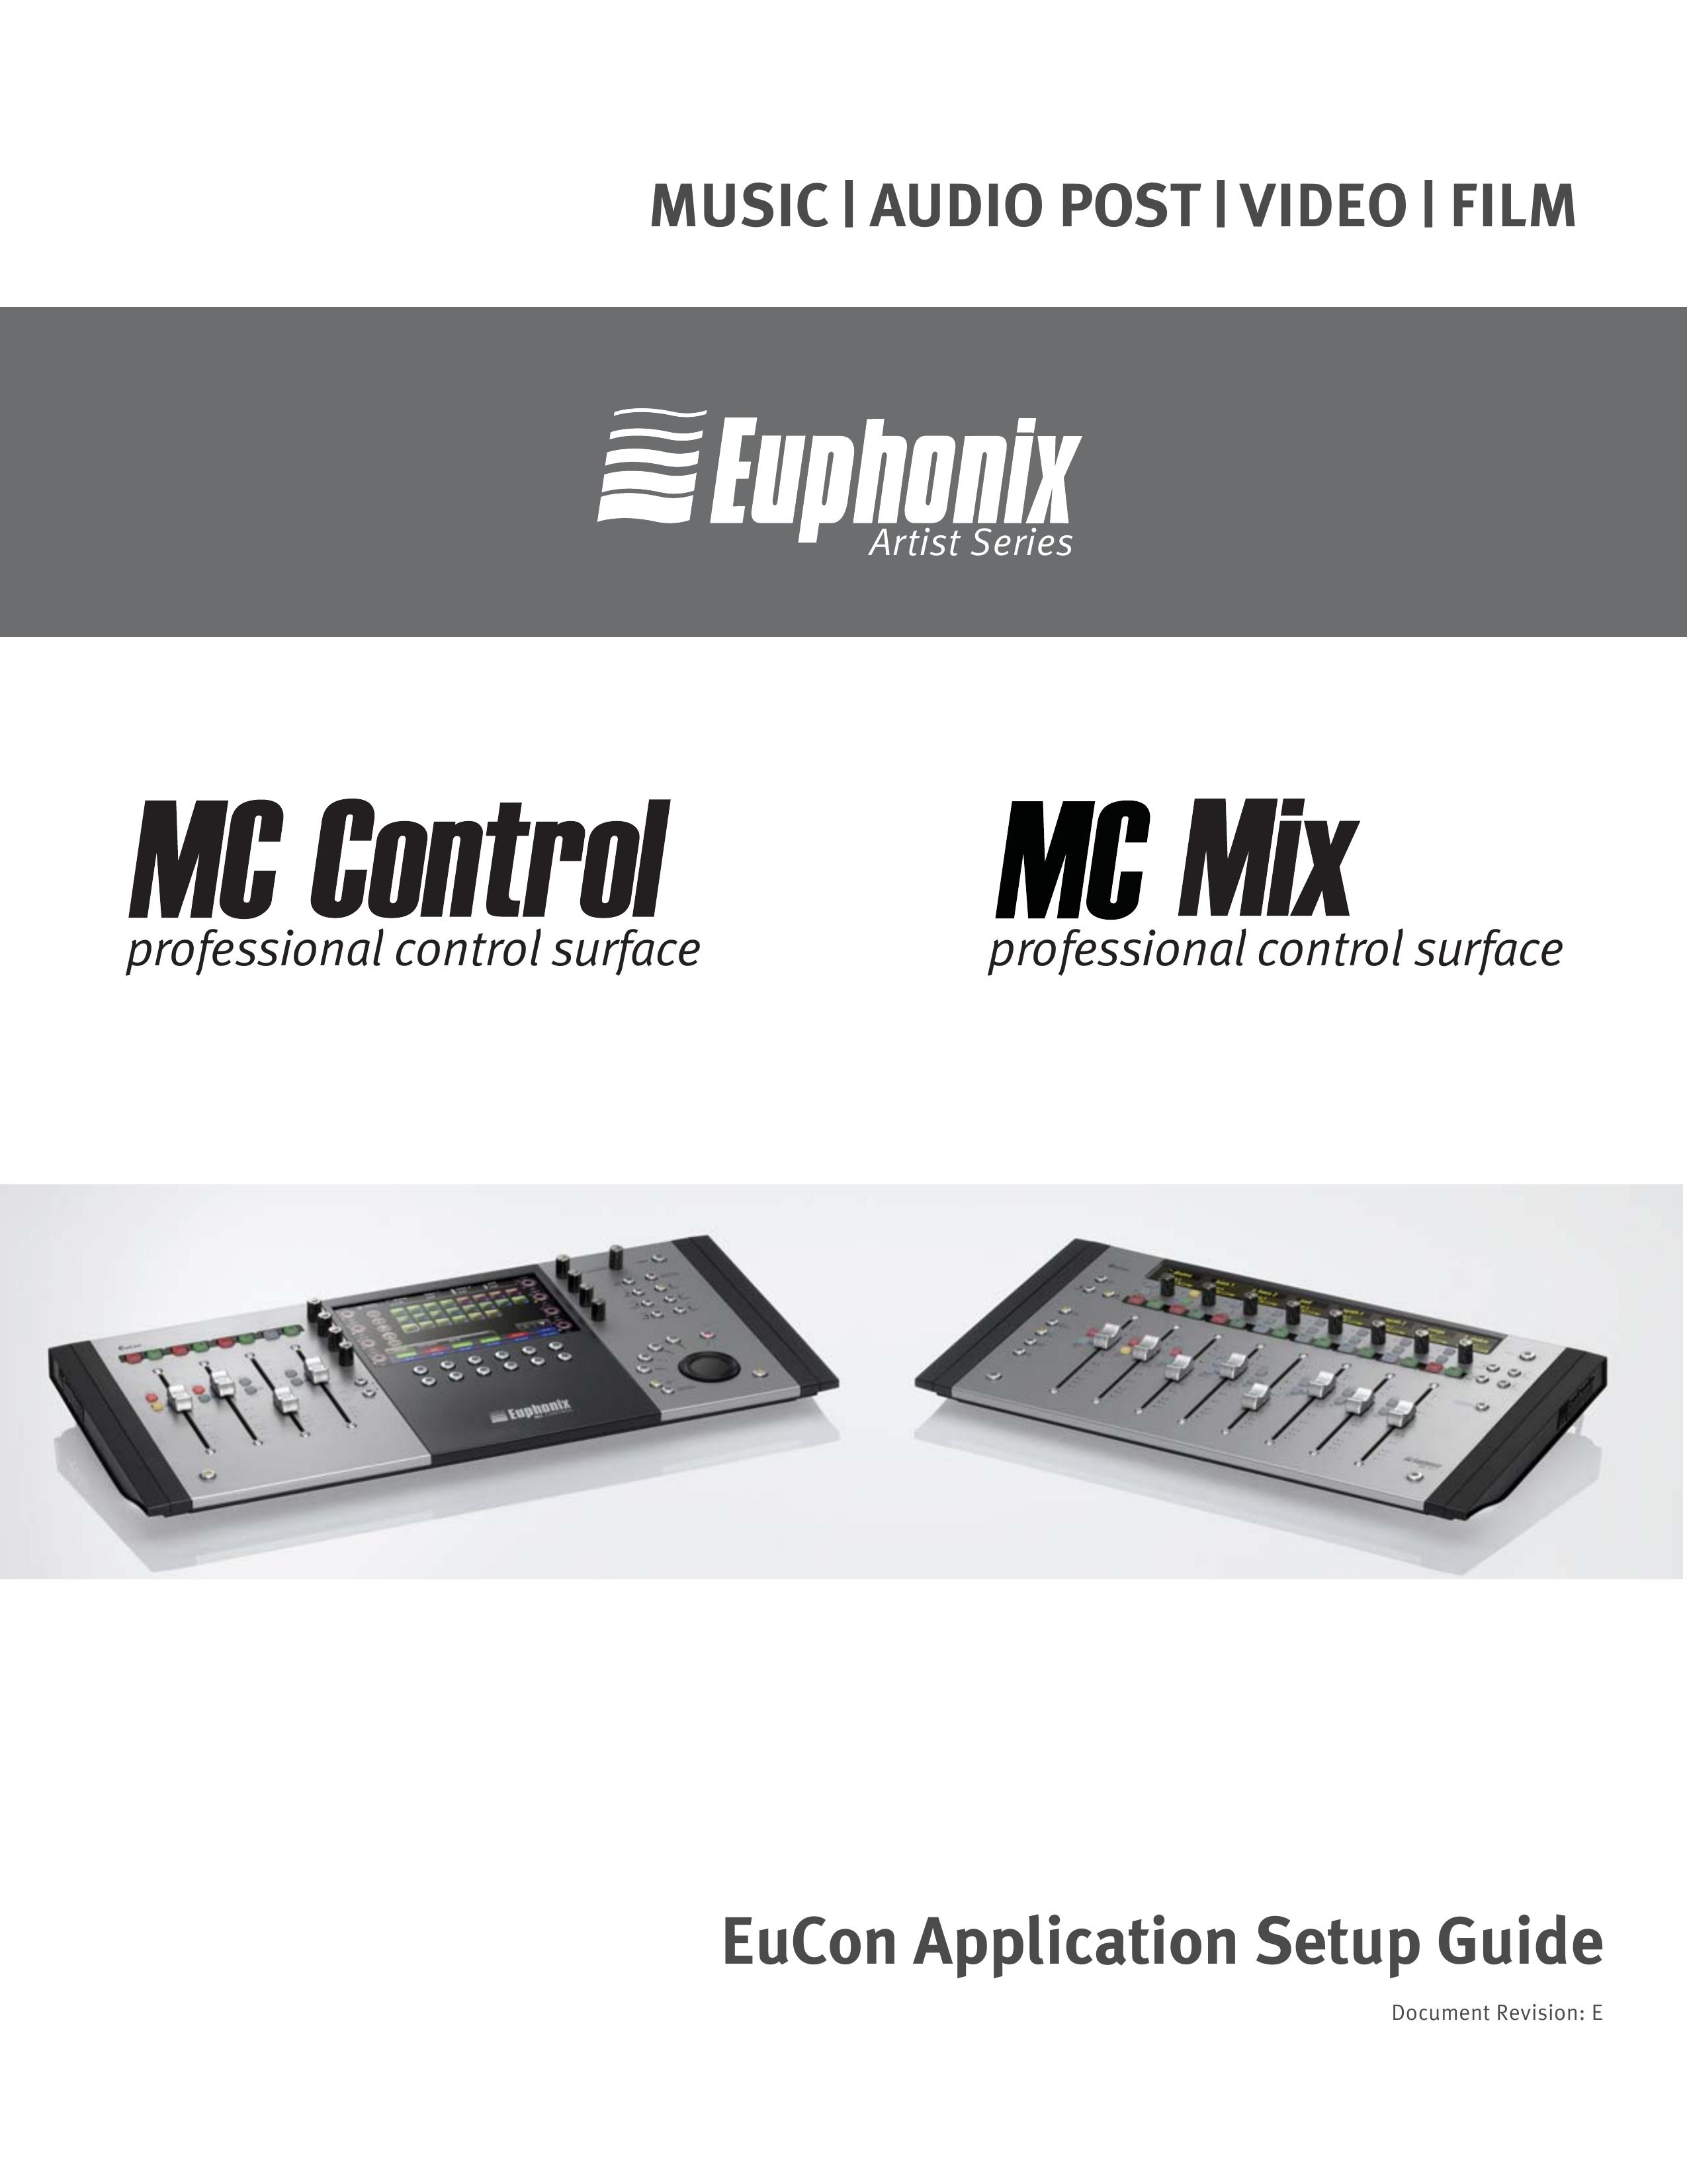 Euphonix Professional Control Surface Camcorder Accessories User Manual